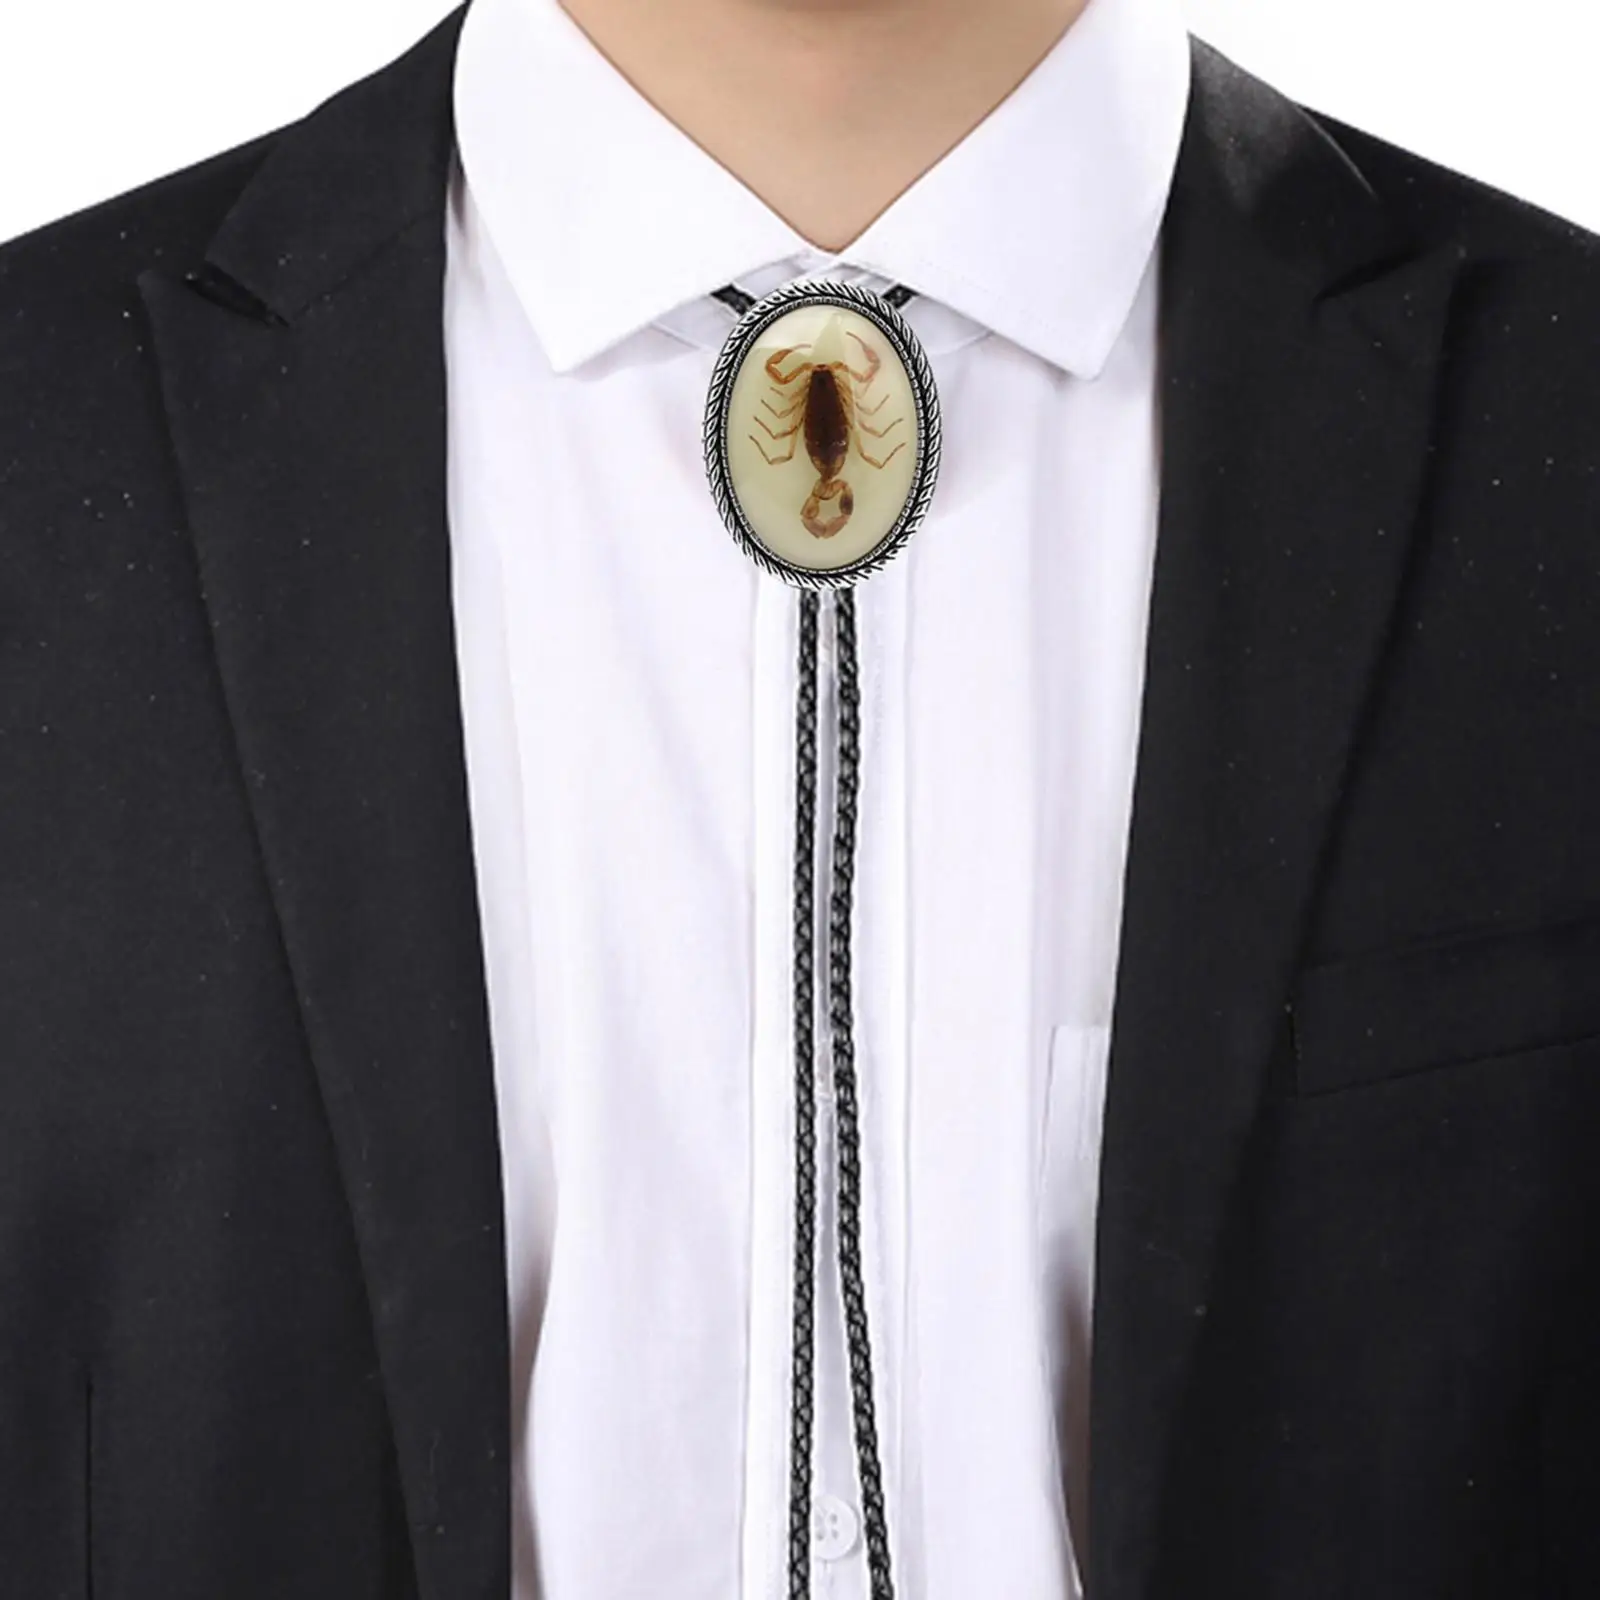 Alloy Mens Bolo Tie Necktie Neck Rope Shirt Chain Western Necklace Accessories PU Leather Adjustable for Women Jazz Hat Cowboy